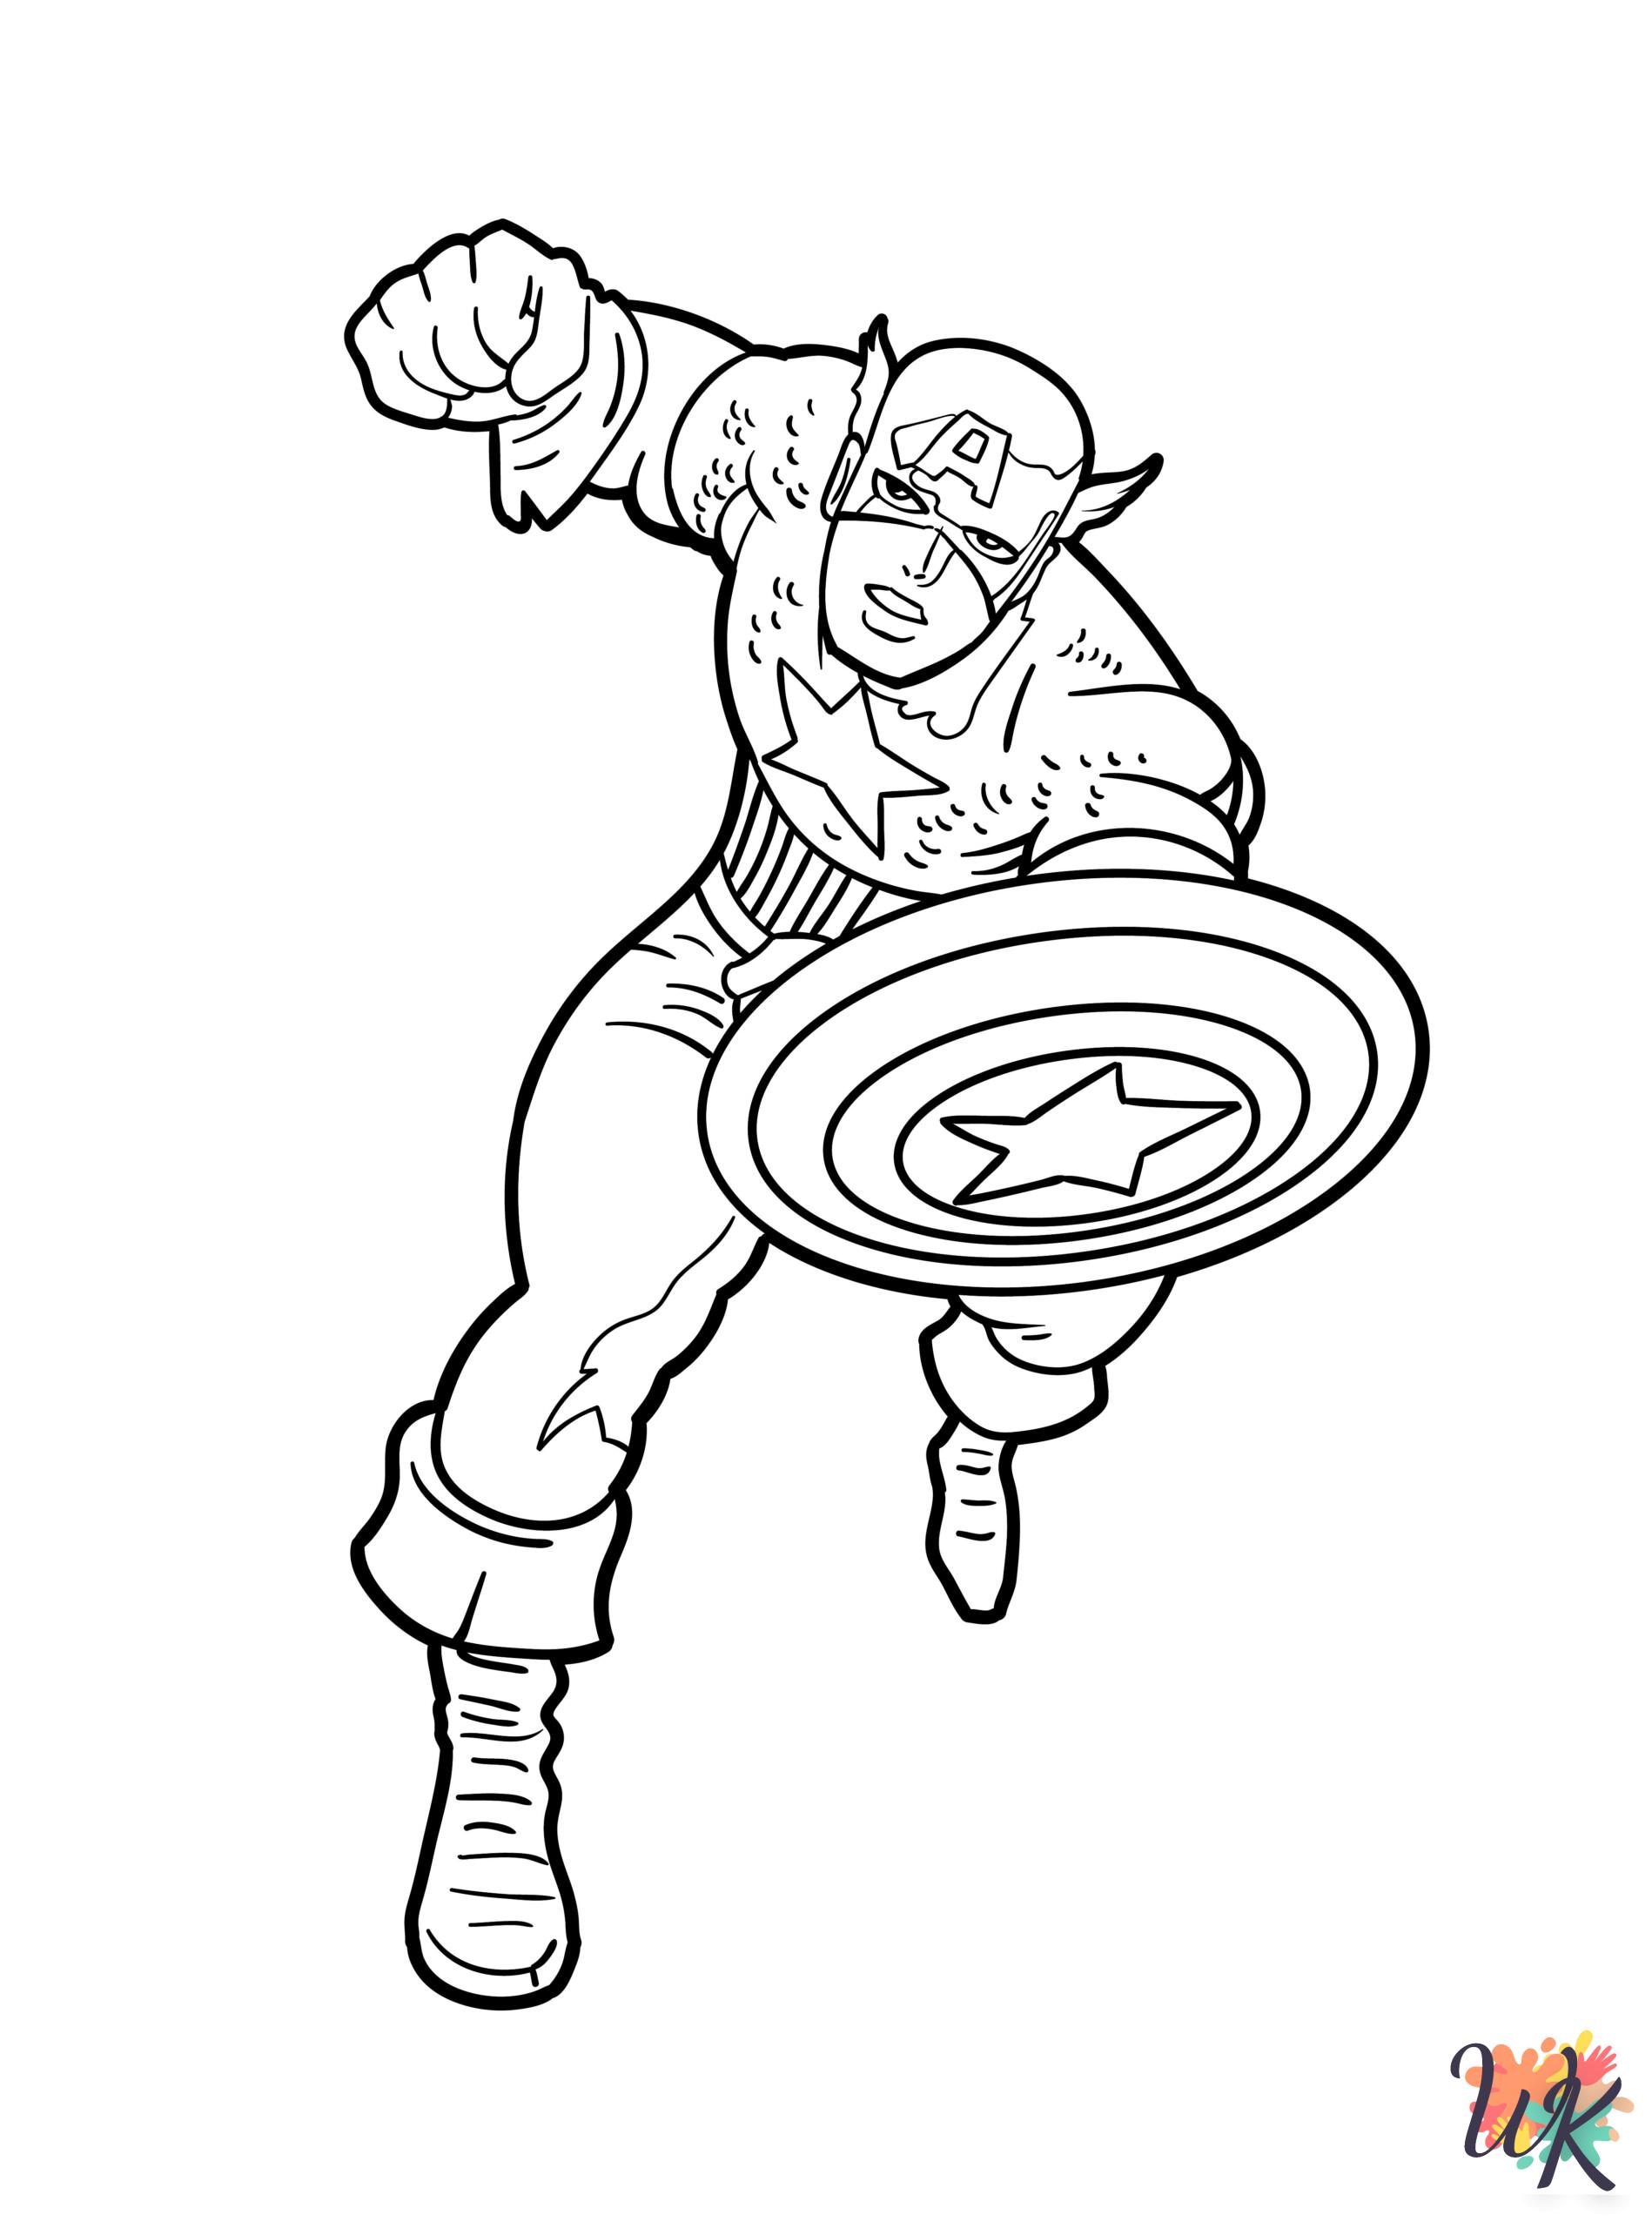 Captain America coloring pages for adults